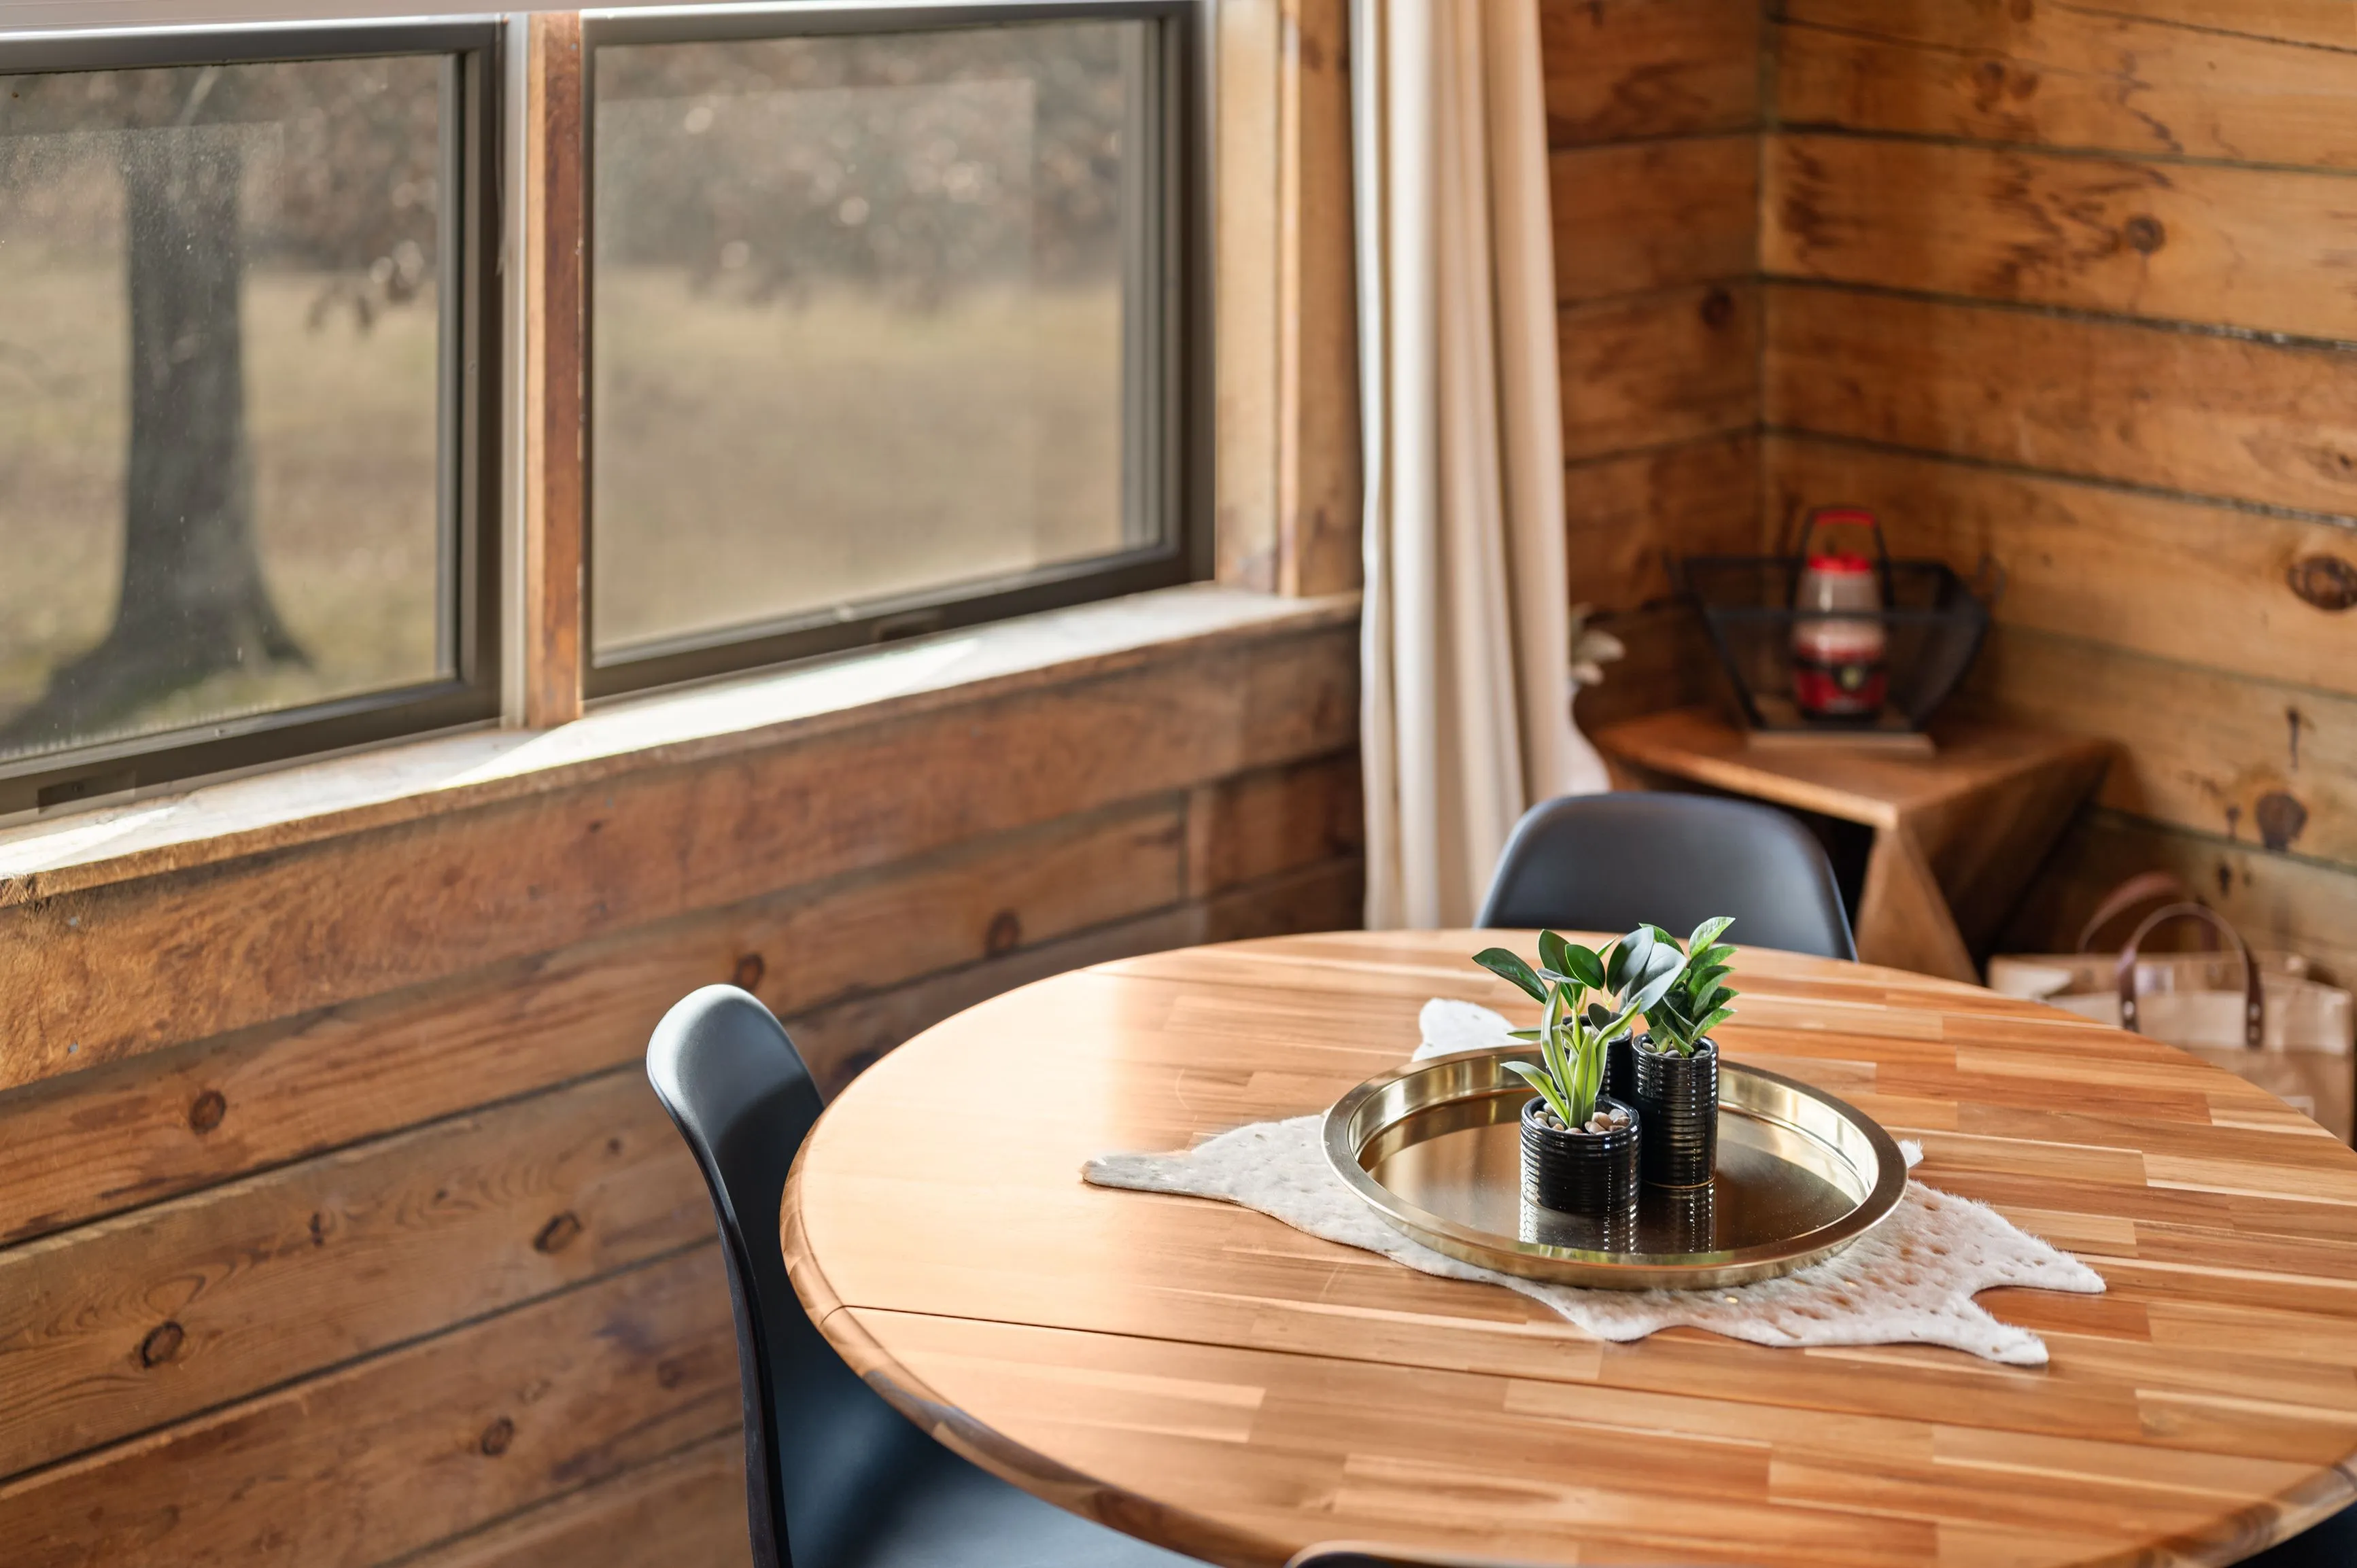 Cozy wooden interior of a cabin with a round dining table and a chair, a plant centerpiece, and a window view to the outdoors.